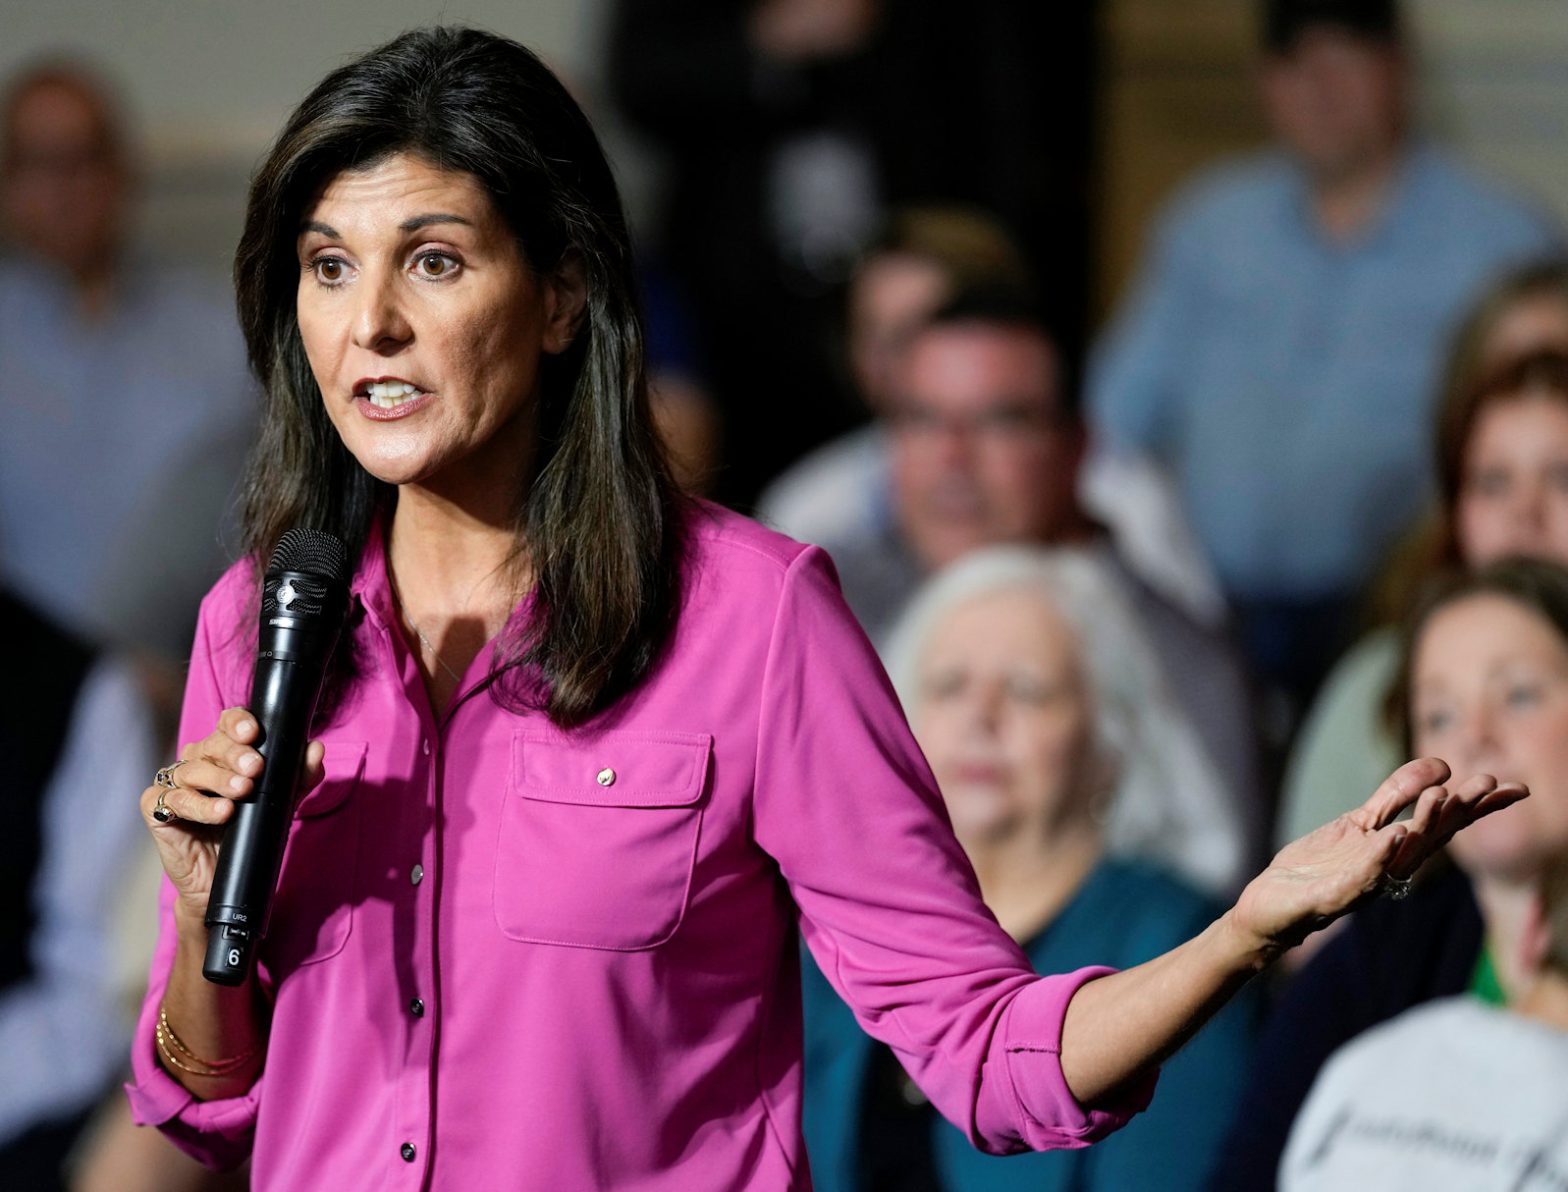 Nikki Haley Wants to Be the GOP’s Trump Alternative. Ron DeSantis and Others Trying to Stop Her